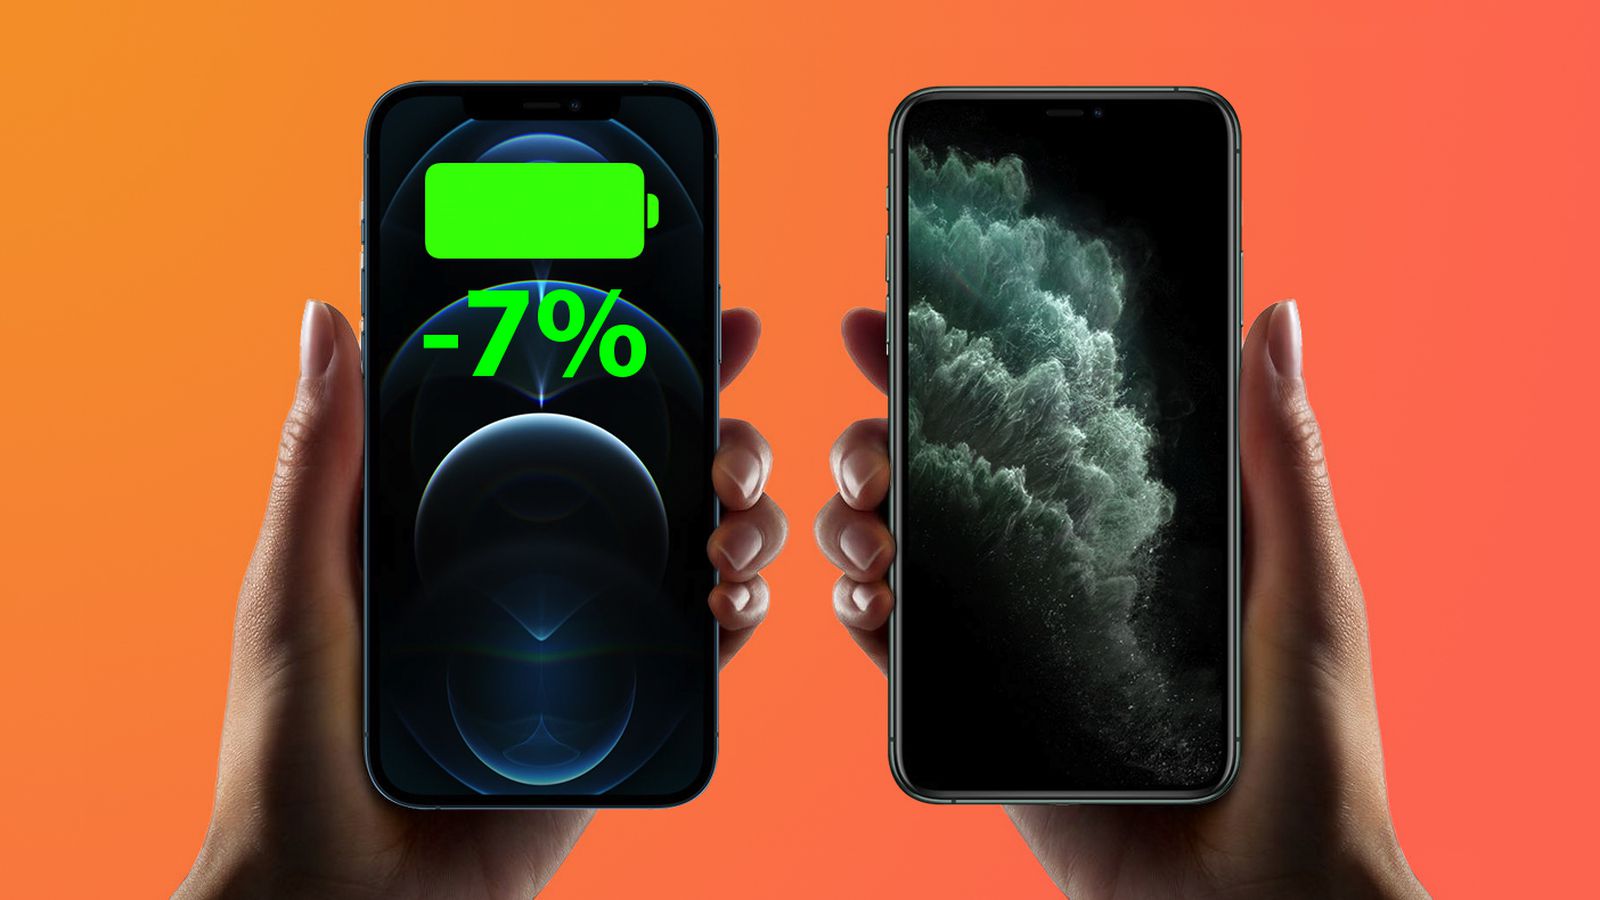 11 Pro Vs Pro Max Battery : Iphone 11 Pro Max Battery Life Test Crushes